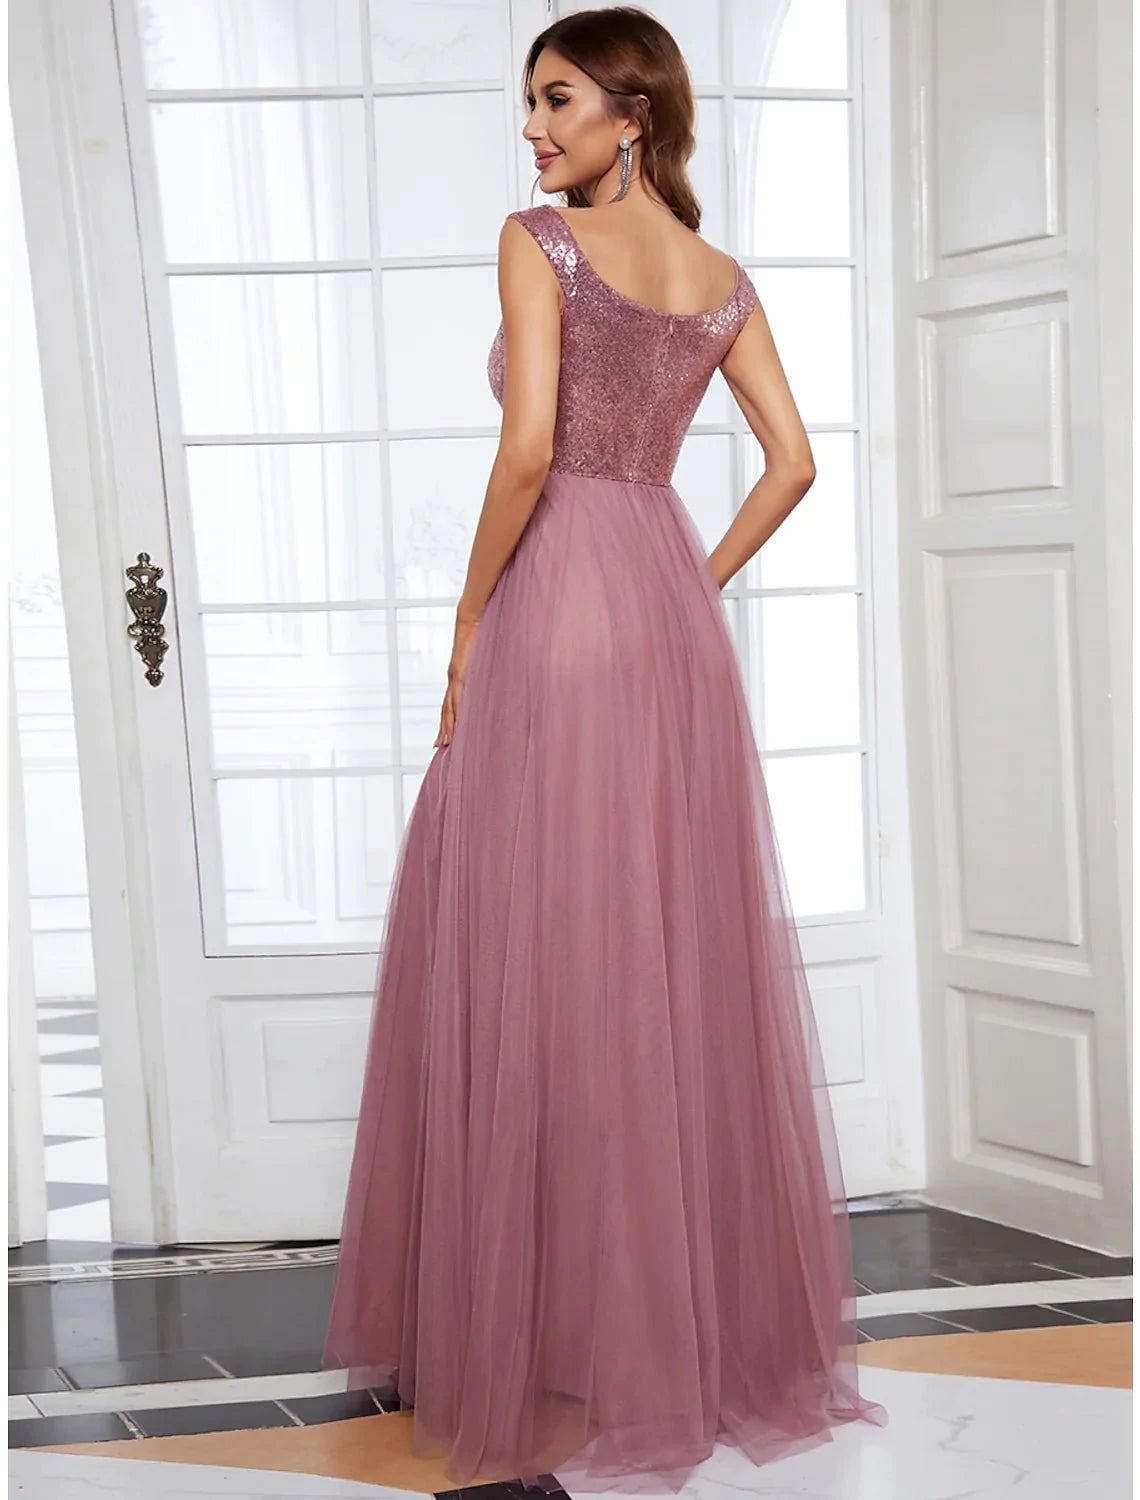 Bridesmaid Dress V Neck Sleeveless Elegant Floor Length Tulle / Sequined with Draping / Tier / Solid Color